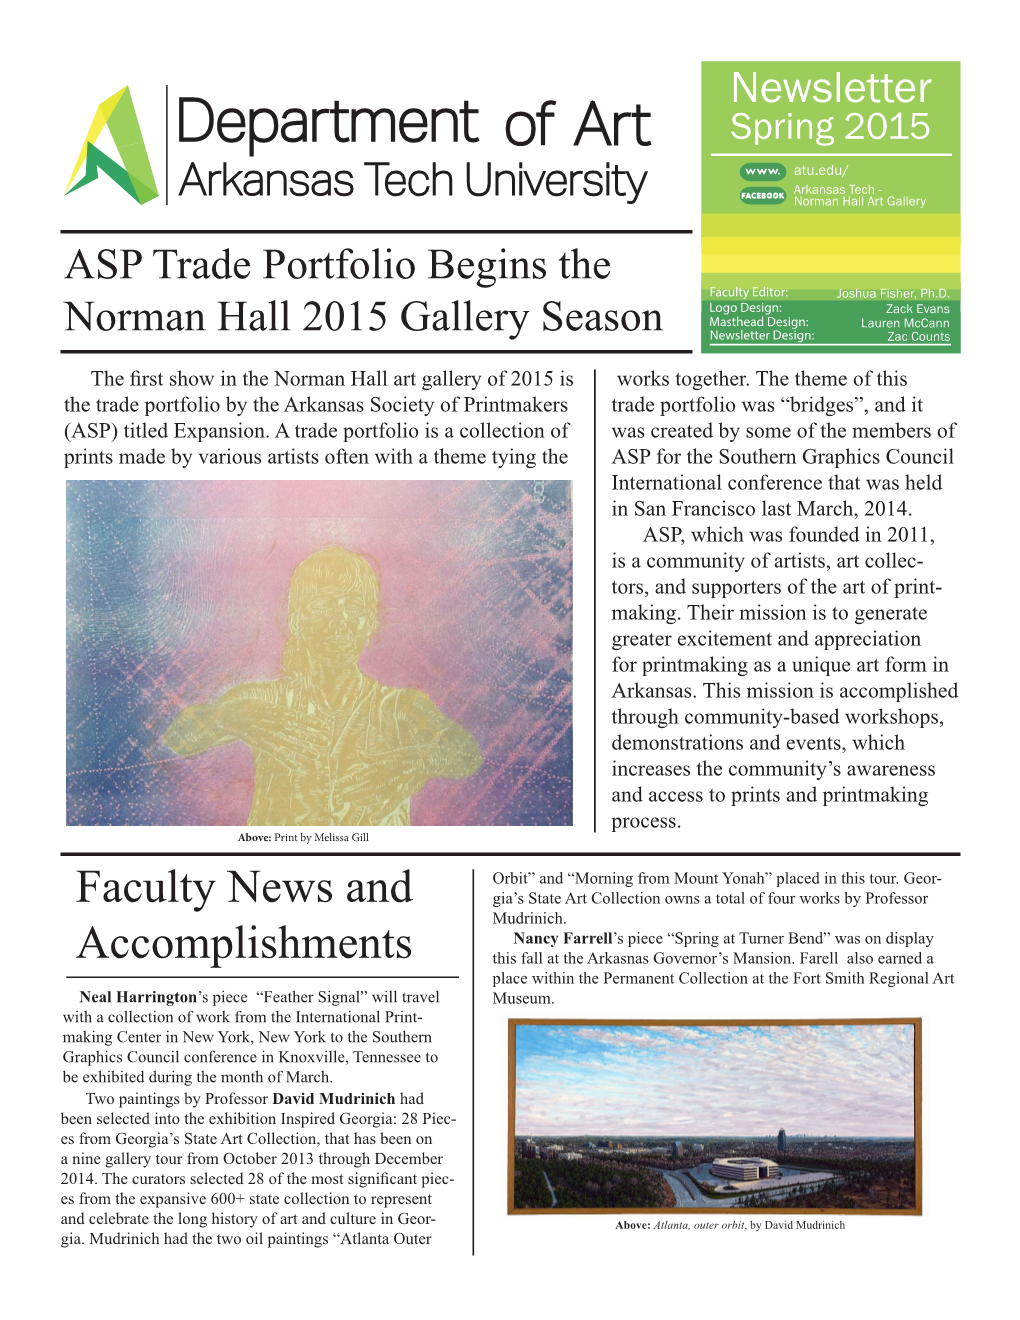 Faculty News and Accomplishments